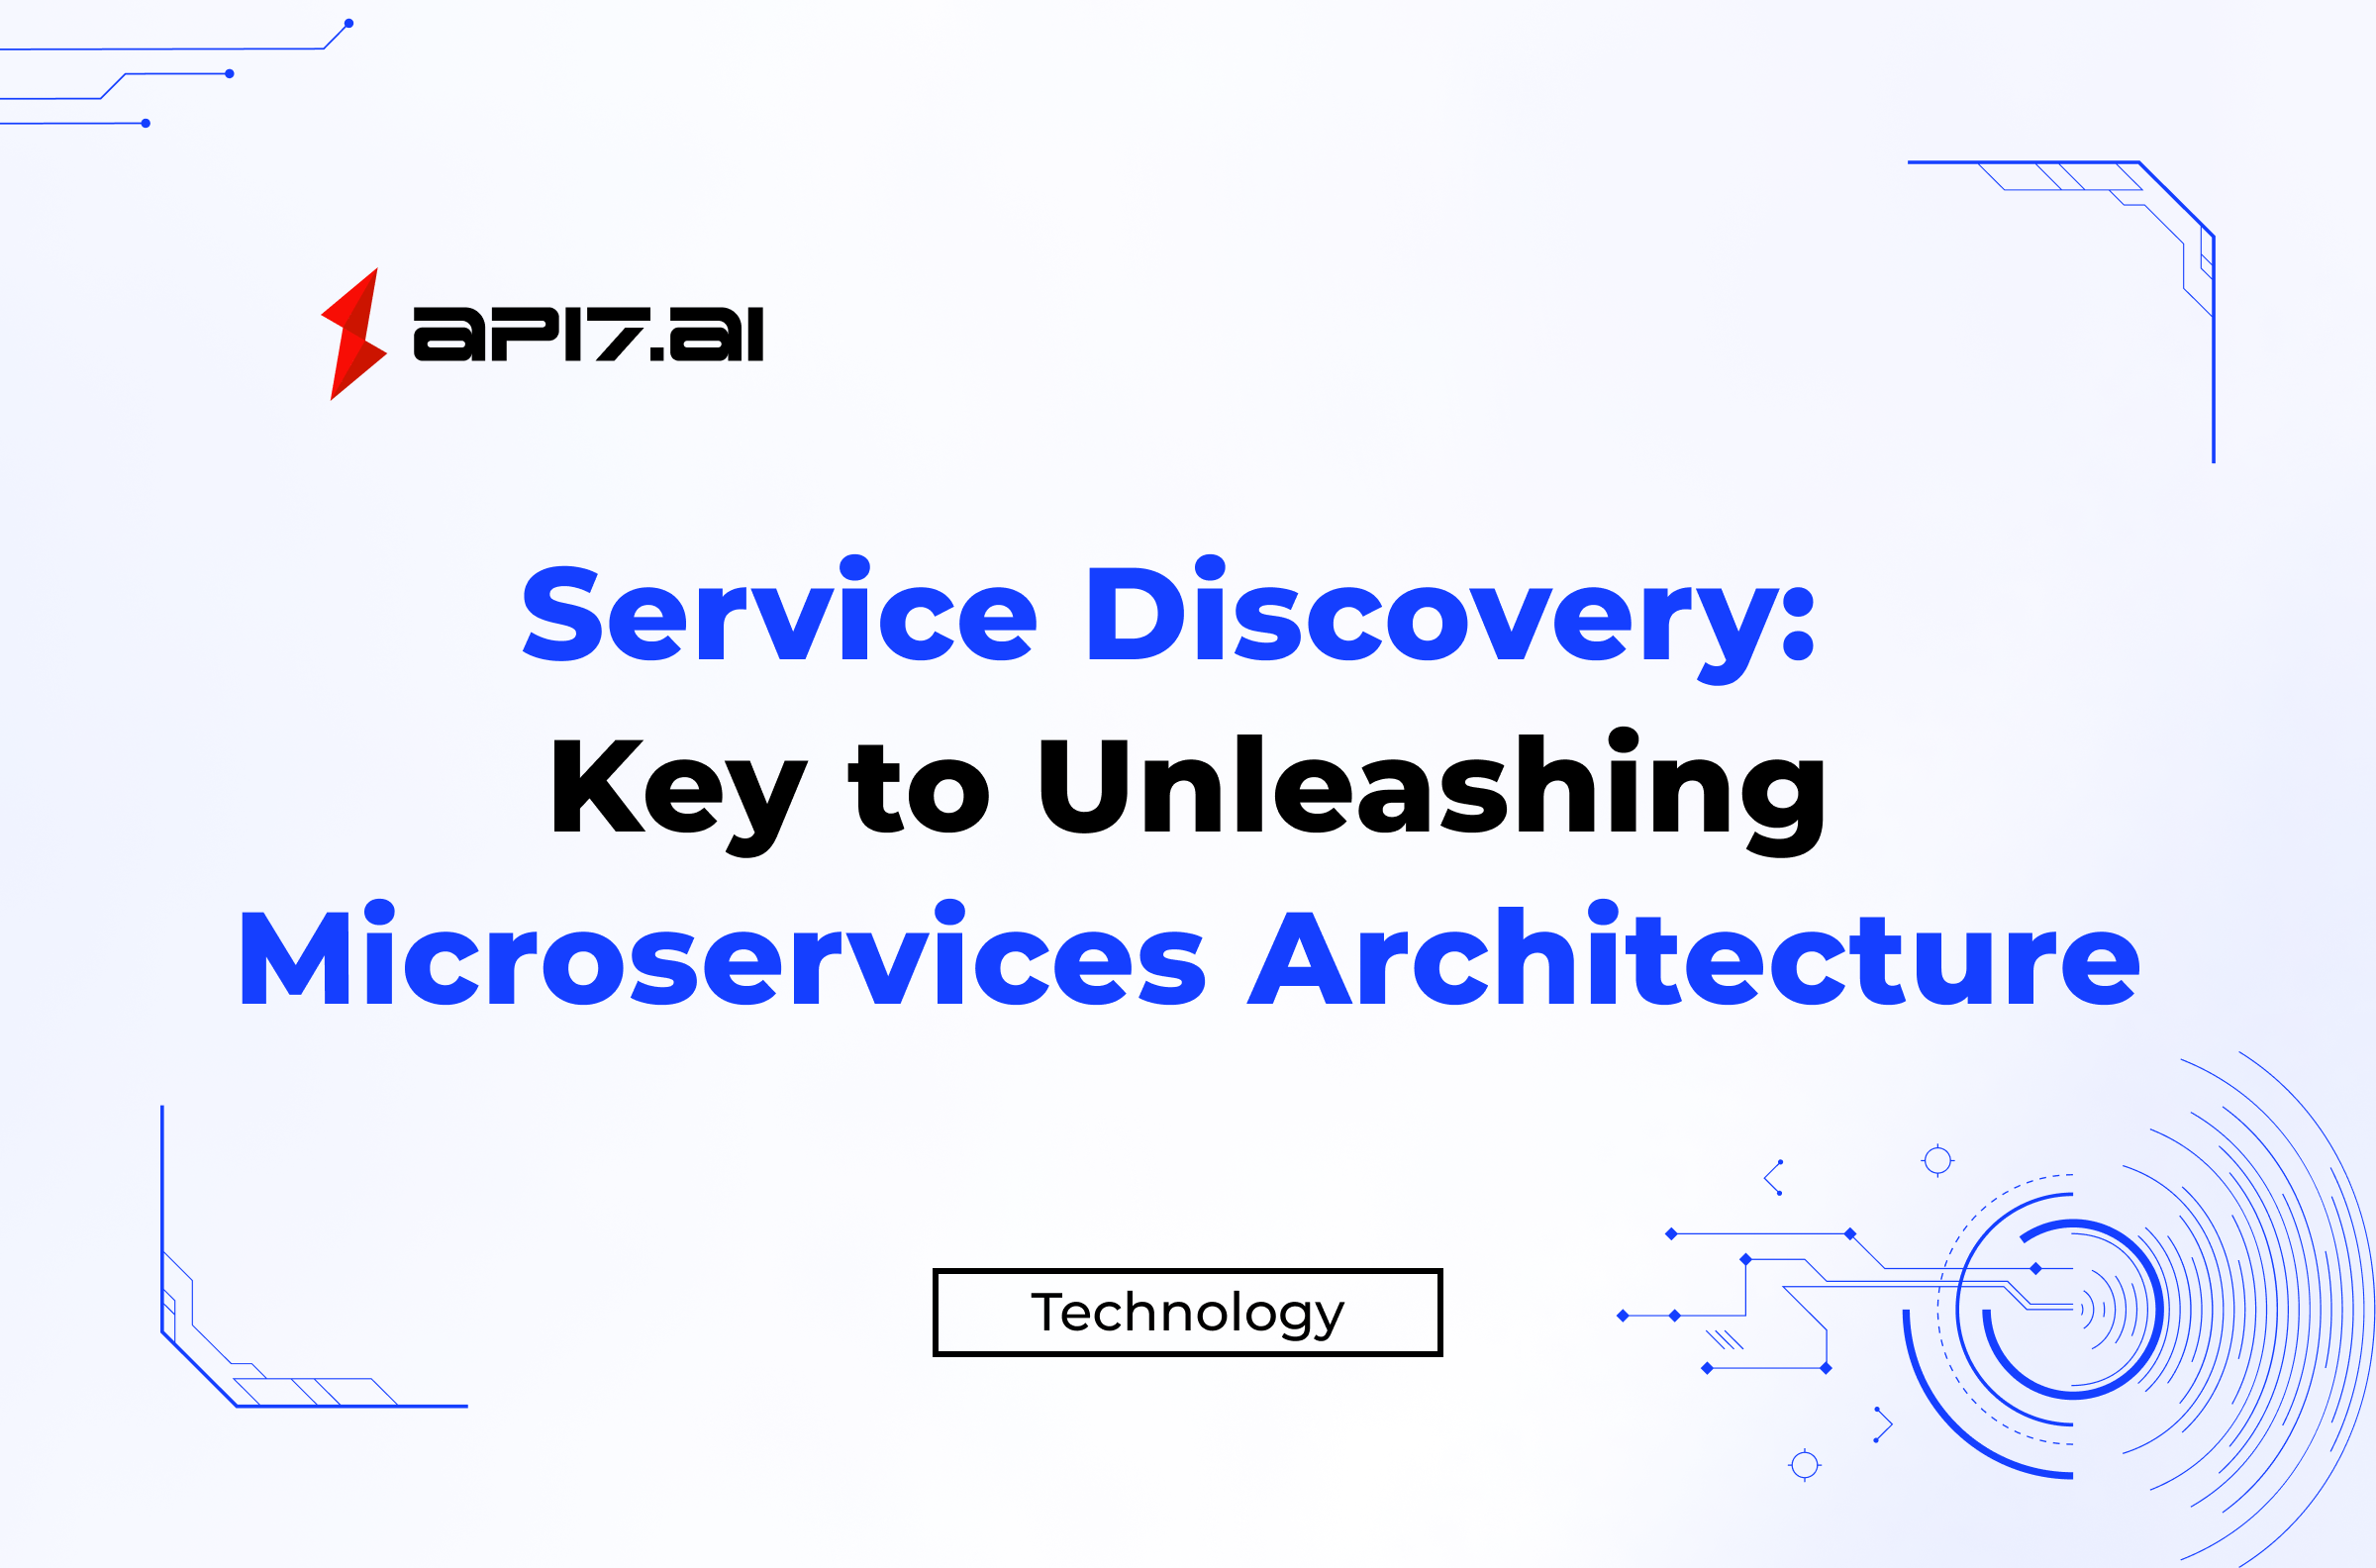 Service Discovery: Key to Unleashing Microservices Architecture